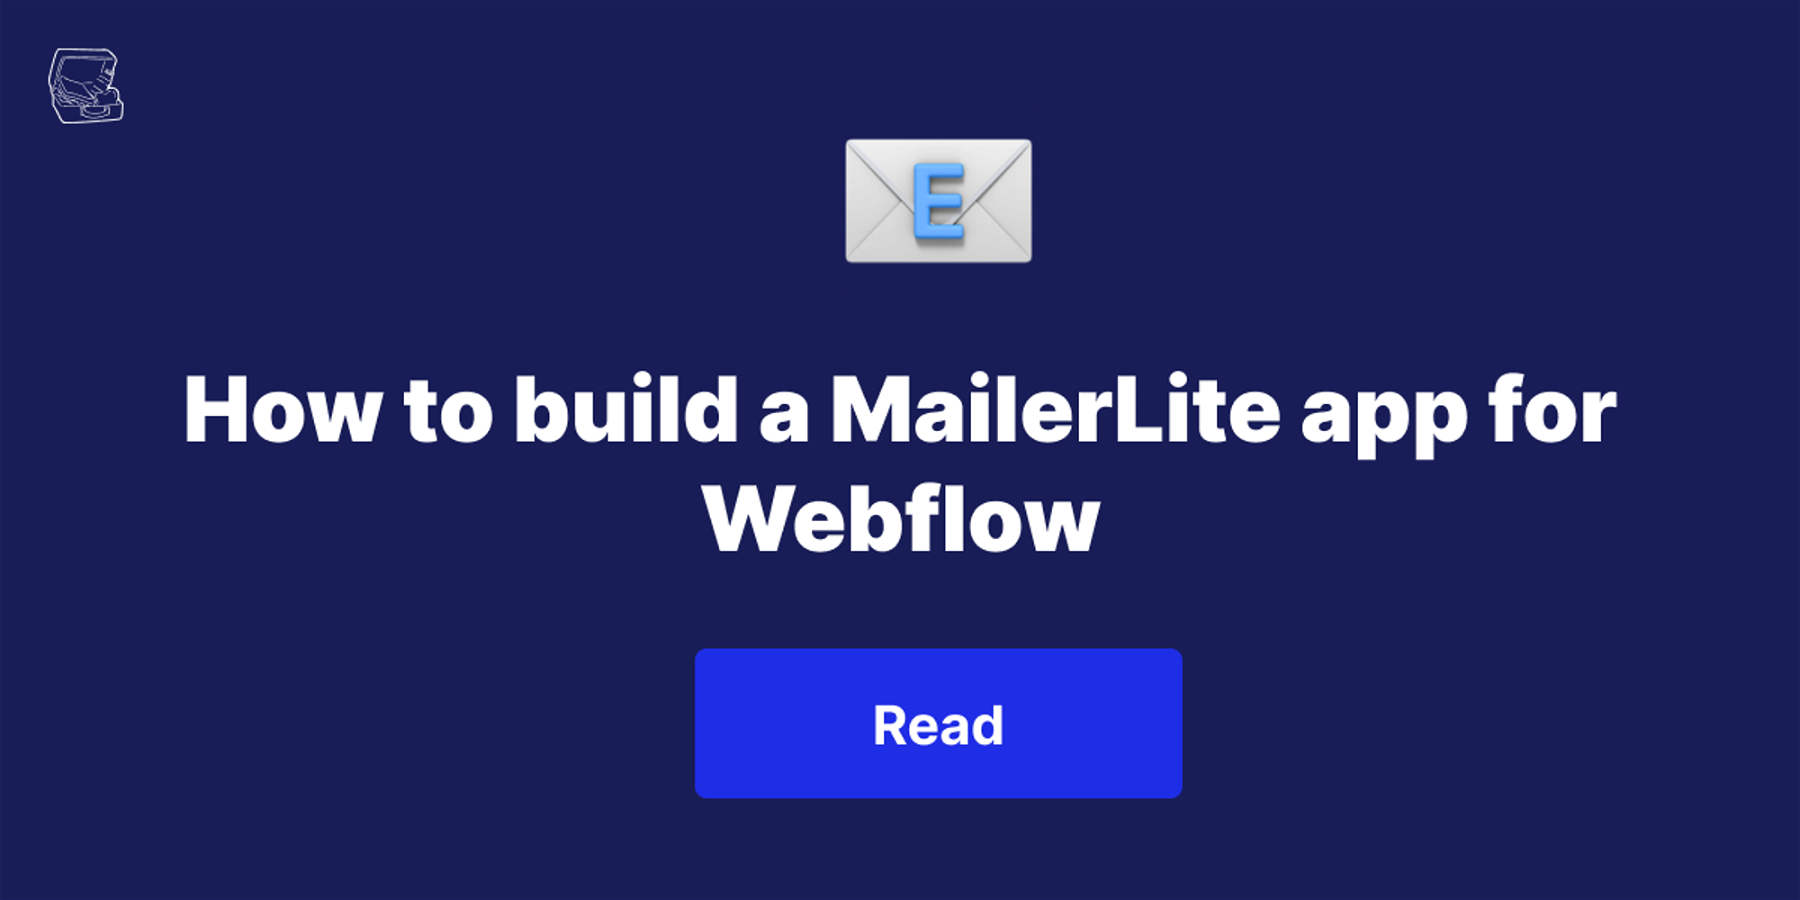 How to build a MailerLite app for Webflow